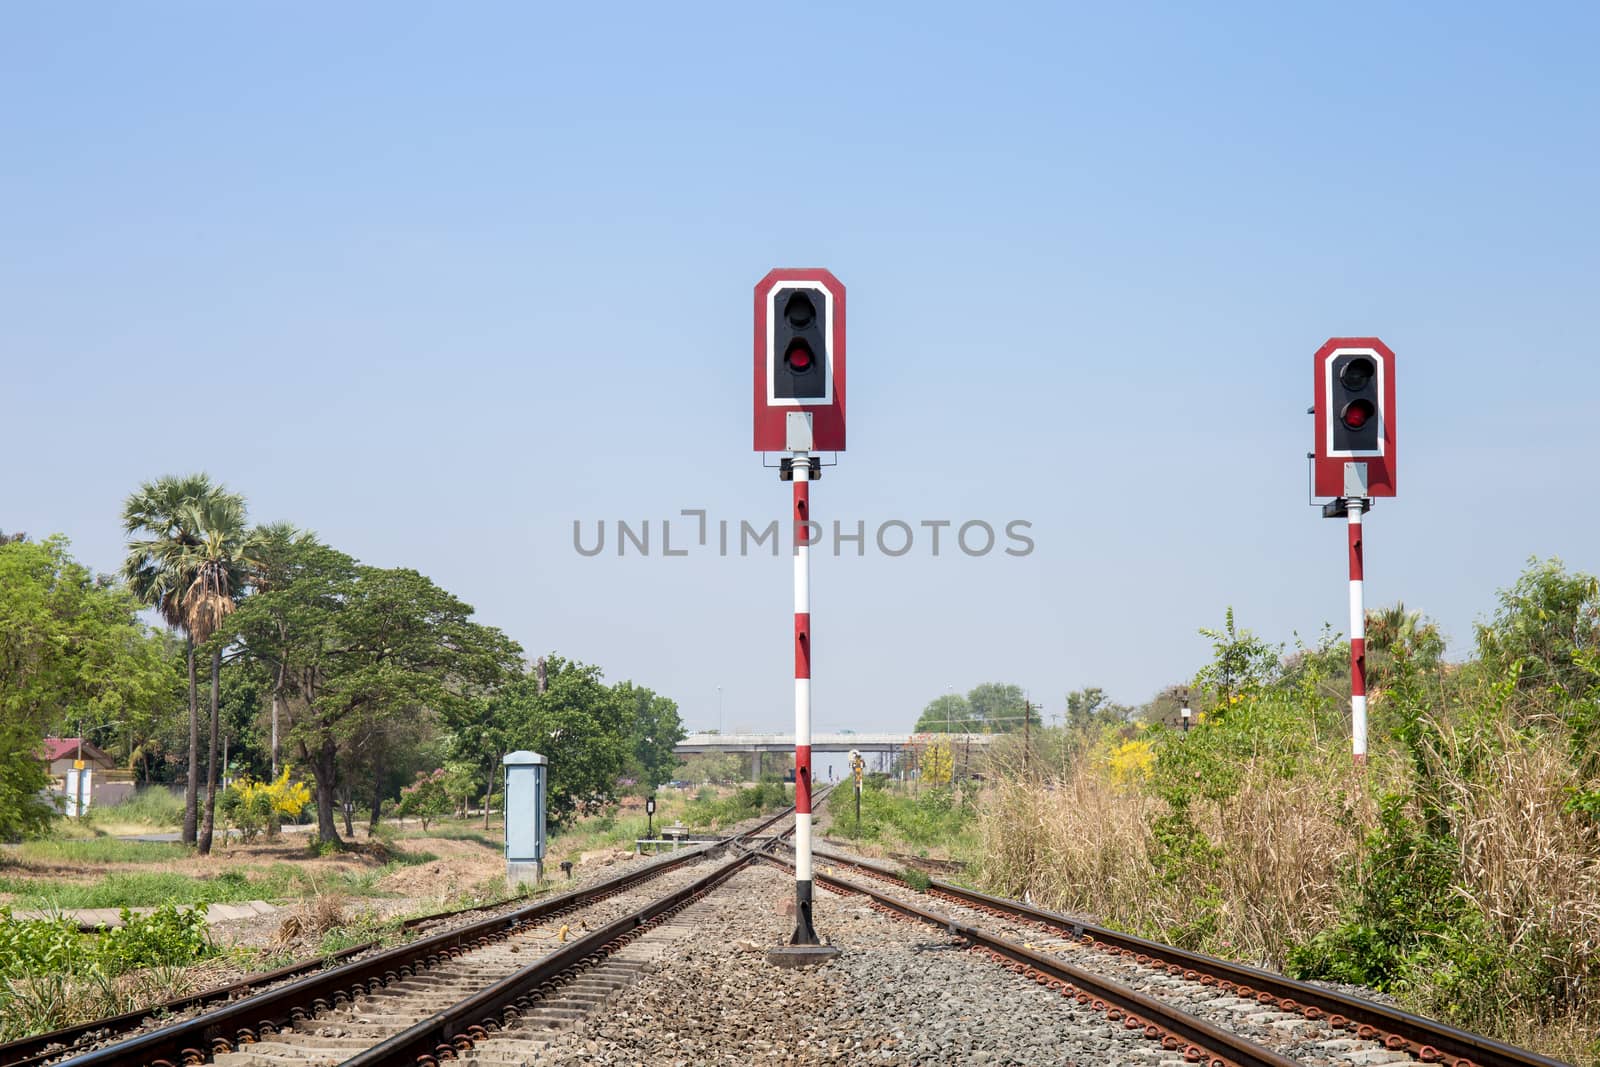 Train signals for railway and and traffic light for locomotive